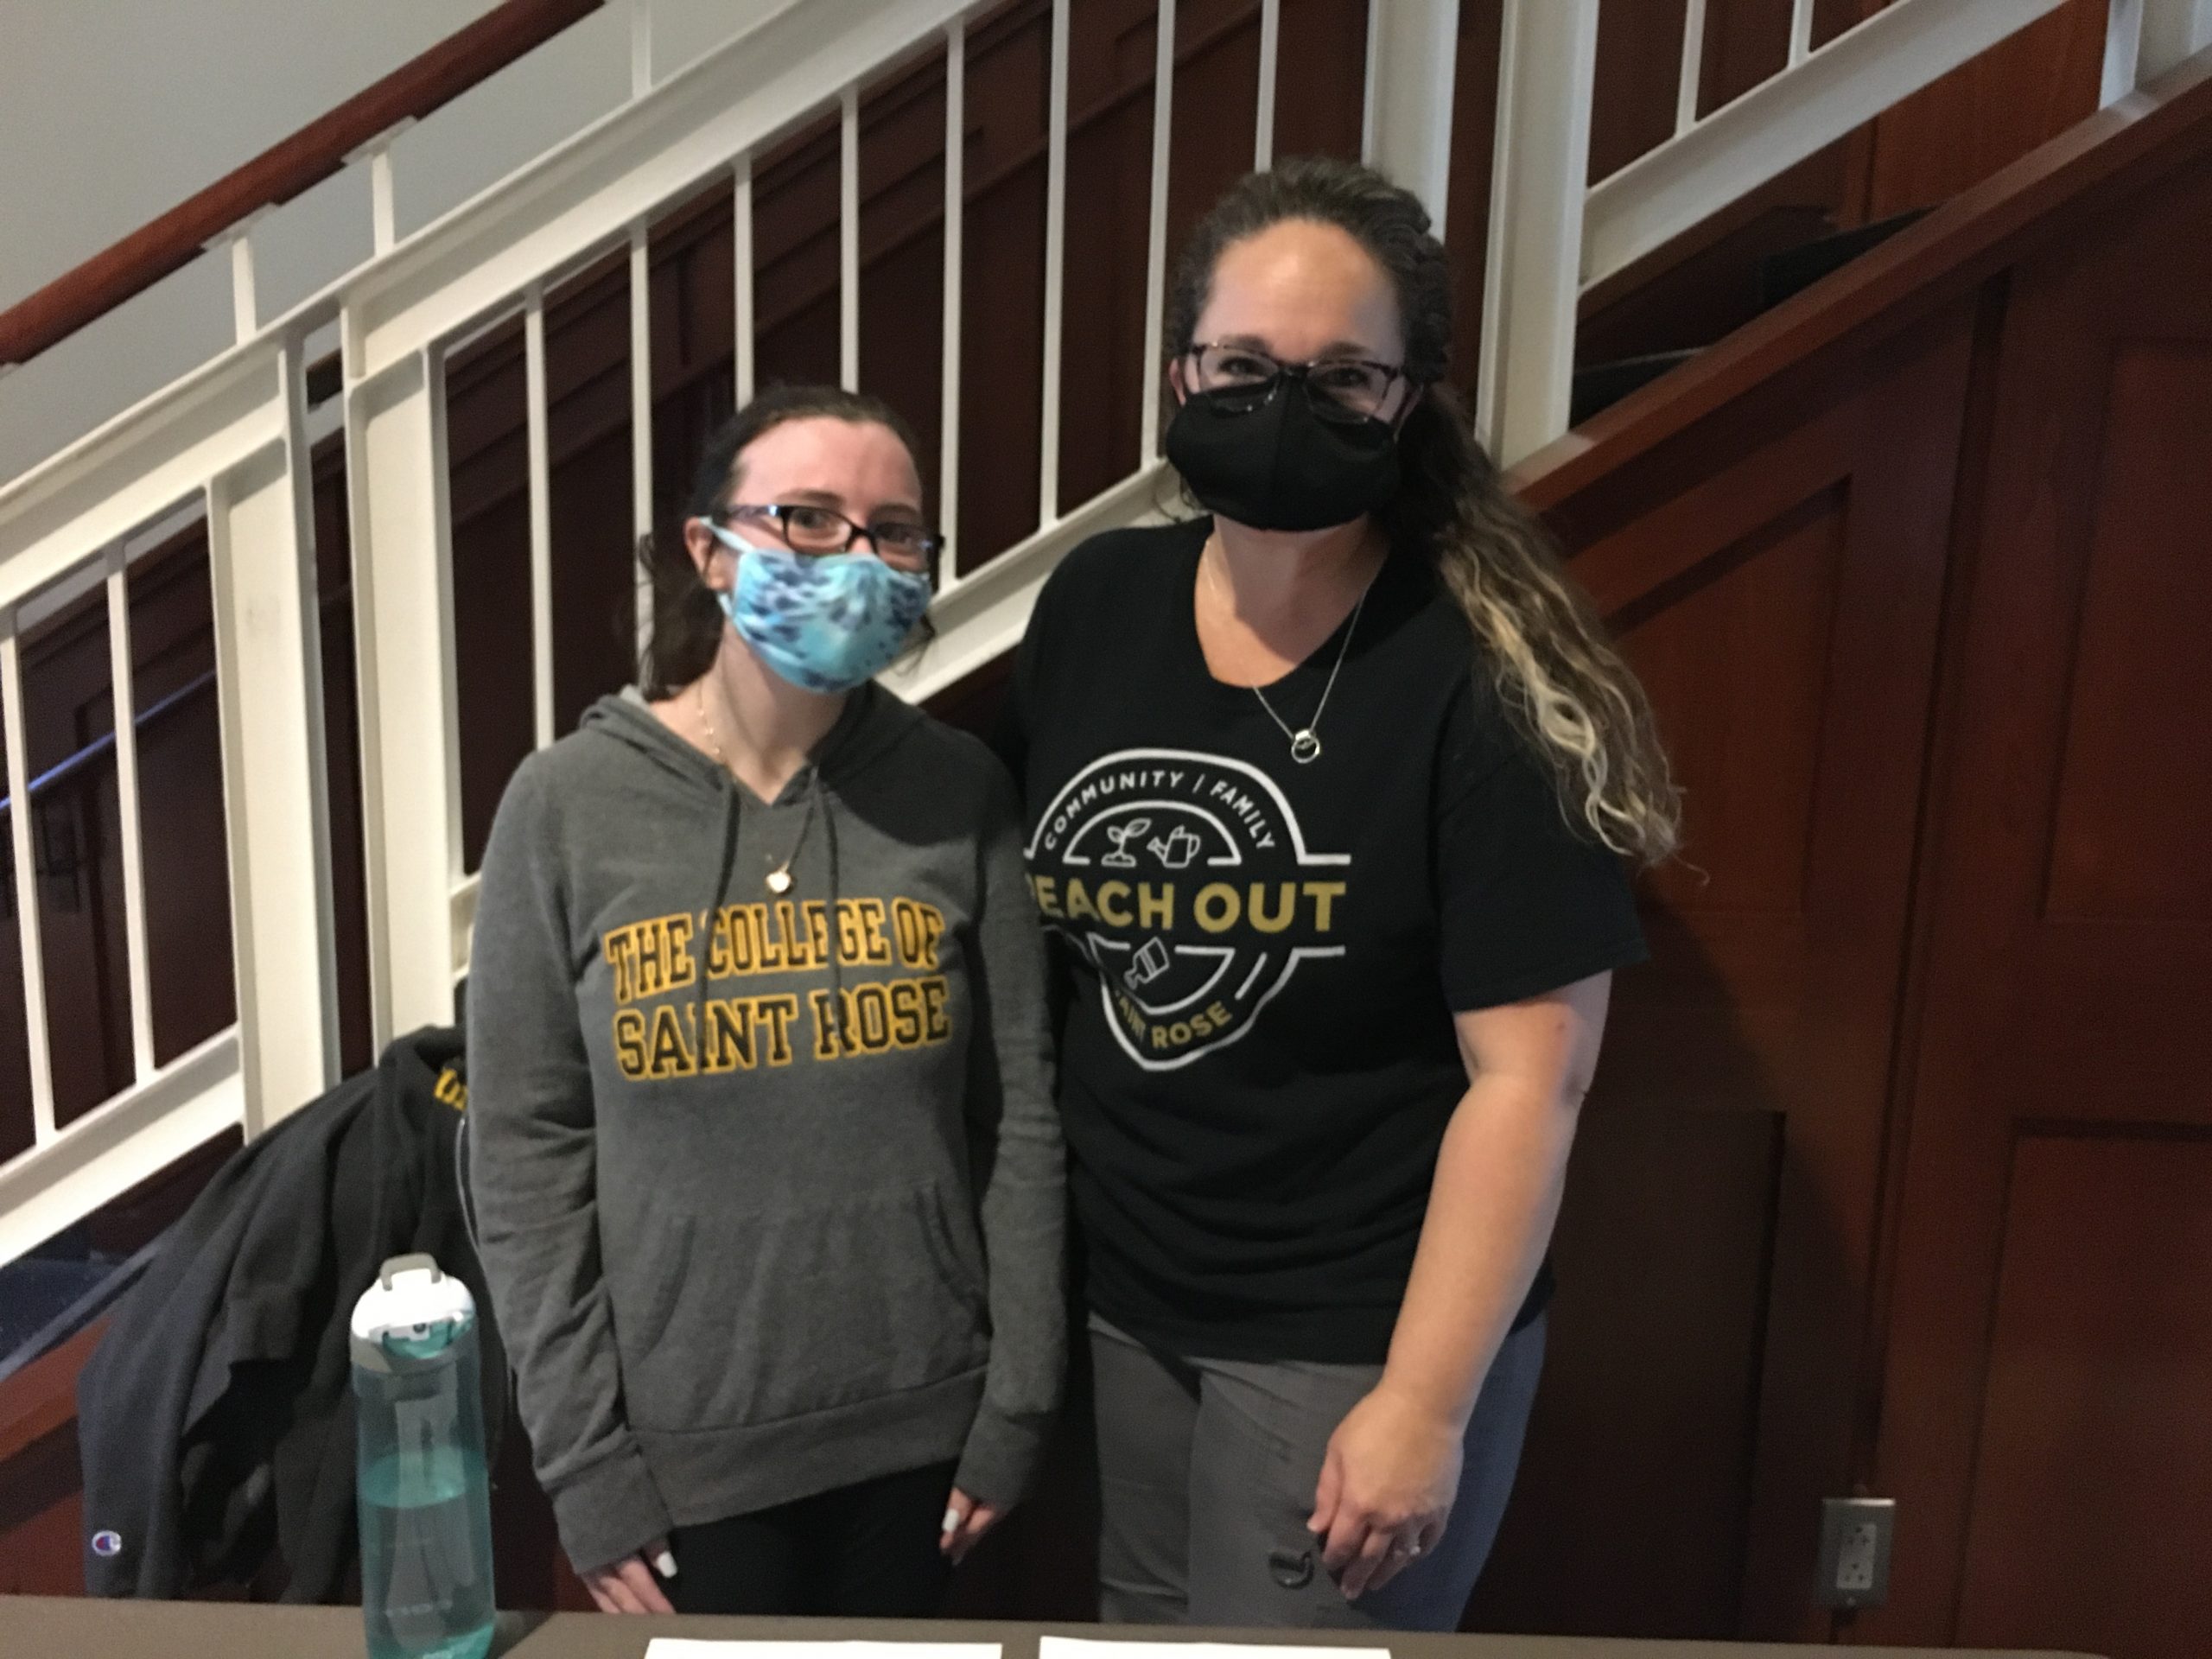 A Saint Rose student is seen here with Amanda Bastiani, Title IX Coordinator and Director of Prevention Education and Success, at our annual Reach Out Saint Rose event. Both Amanda and the student are wearing masks and Saint Rose shirts.